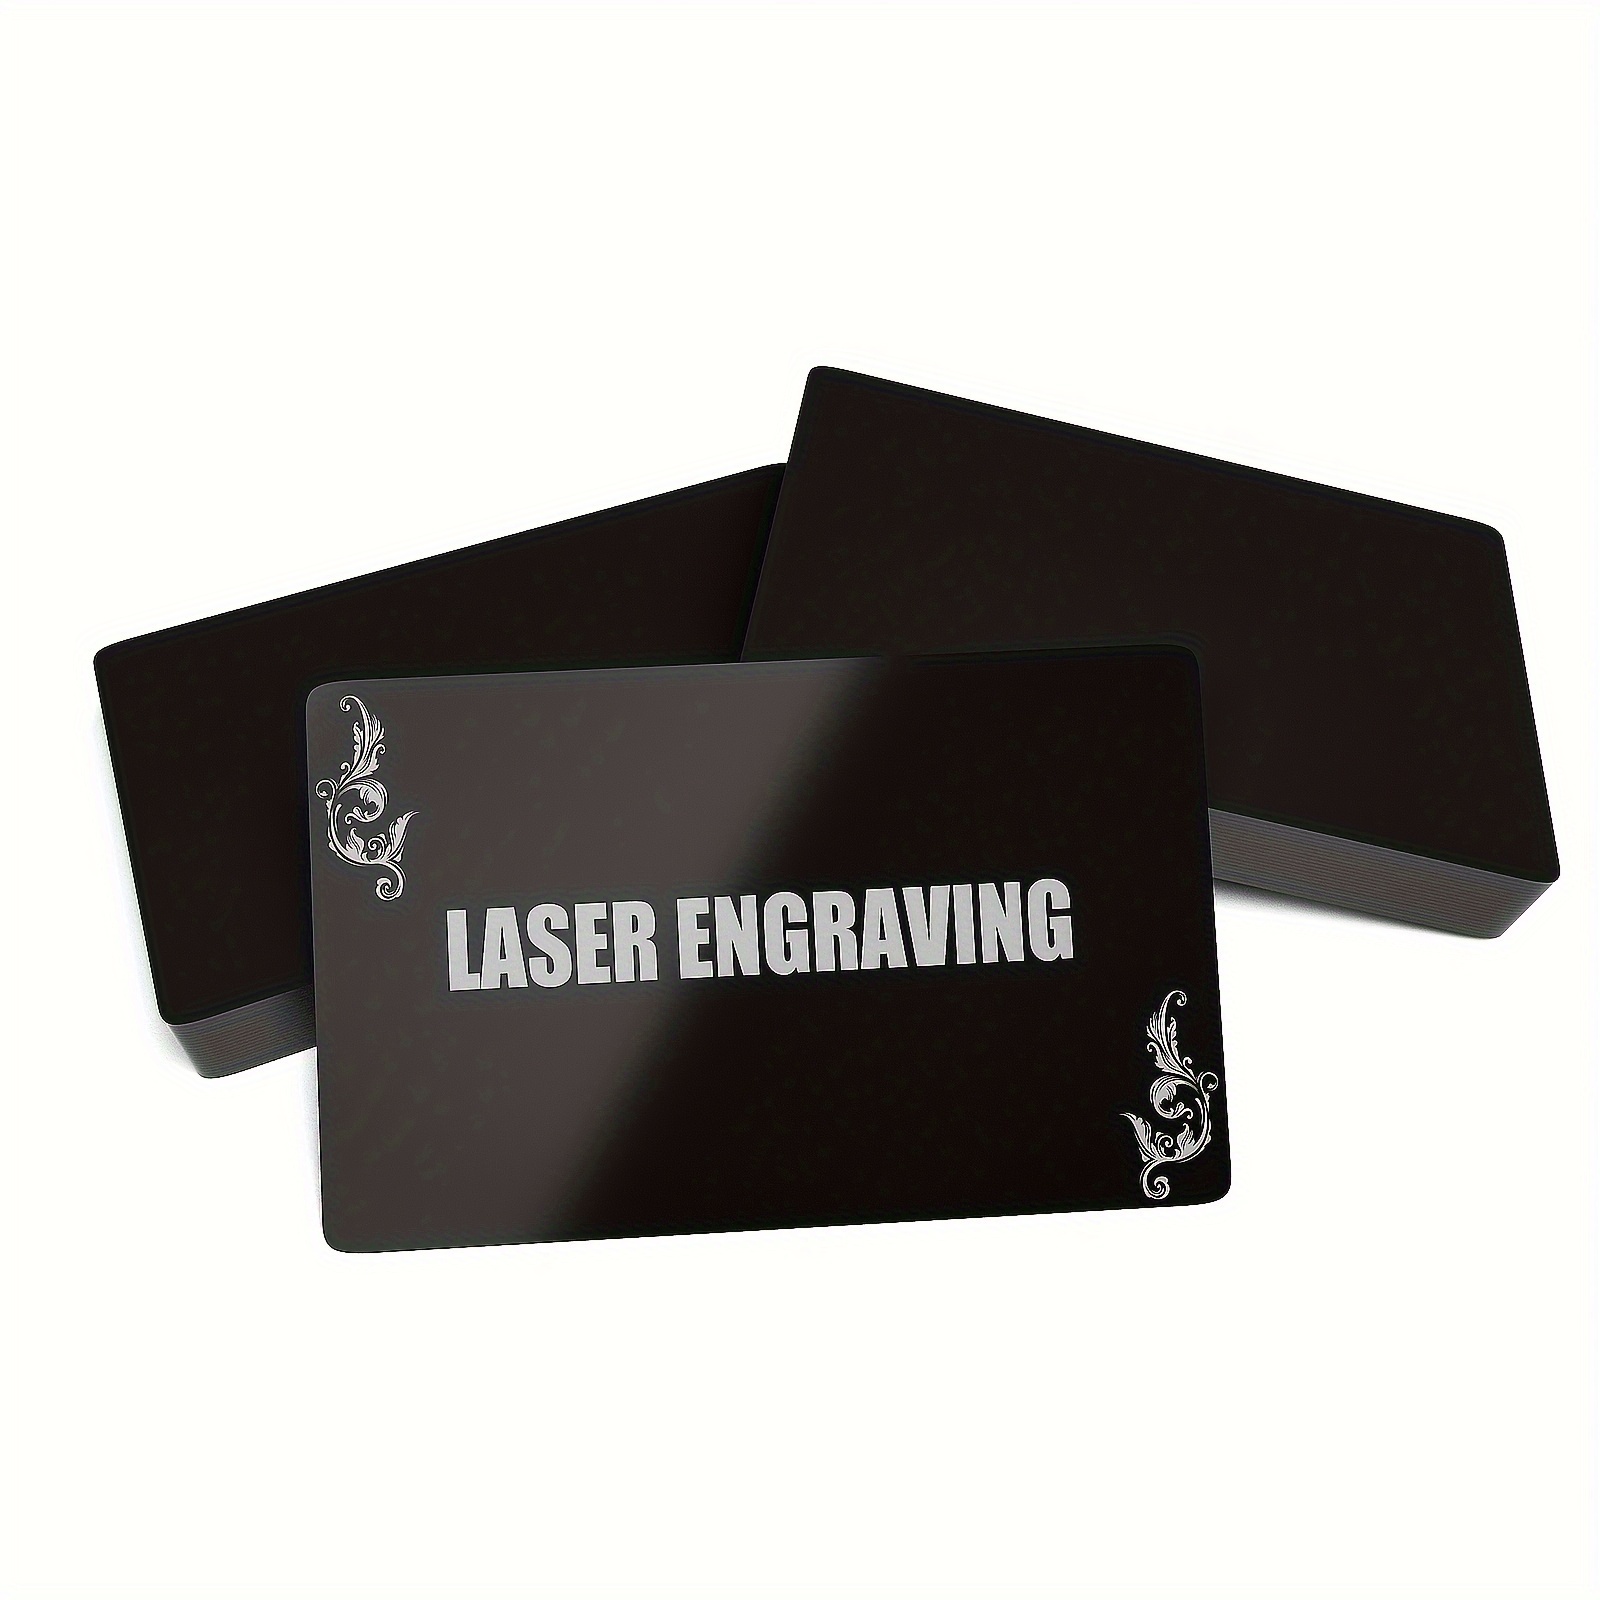 Green Metal Business Cards Laser Engraving Blanks 60 PCS Sublimation Metal  Cards Aluminum Blanks for Engraving DIY Gift Cards Office Name Cards  (3.38'' x 2.12'' x 0.007'')